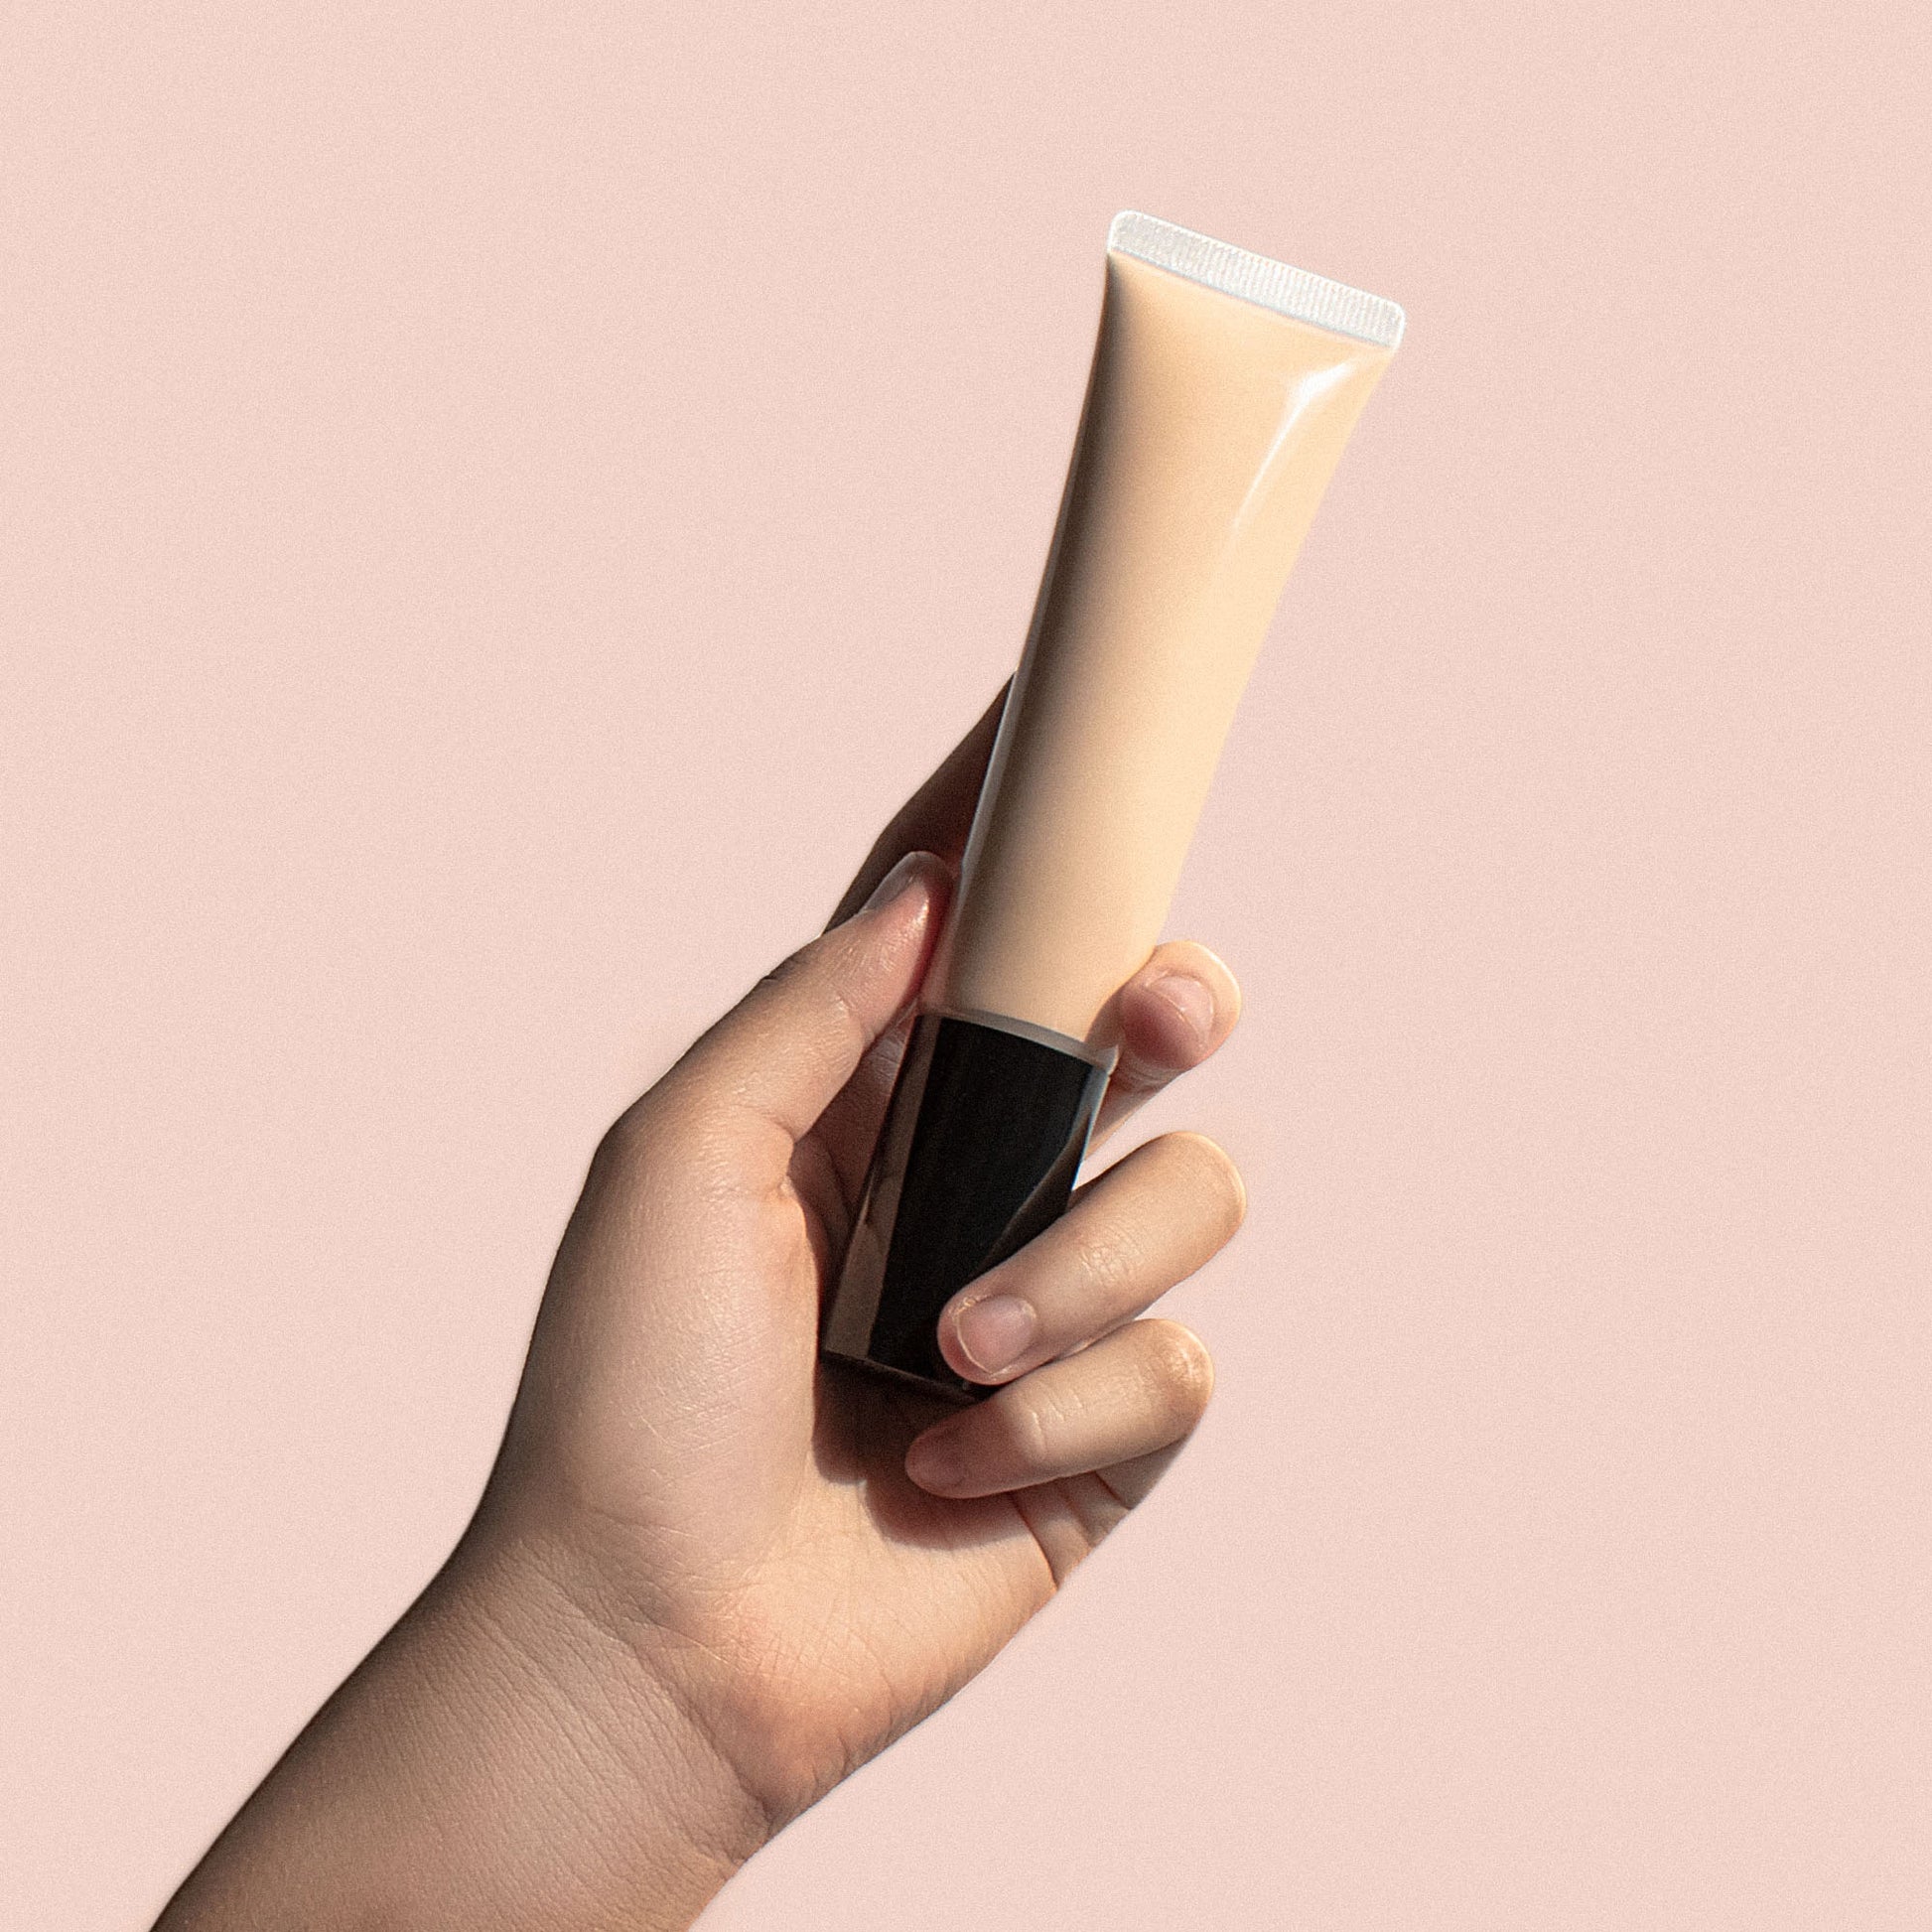 Cruisin Organics Birch BB Cream with SPF - the perfect solution for simplified and nourished skin. This lightweight formula offers medium tint for a natural look while providing SPF 18 protection and hydration. Say goodbye to multiple products and hello to an all-in-one solution for your foundation routine.